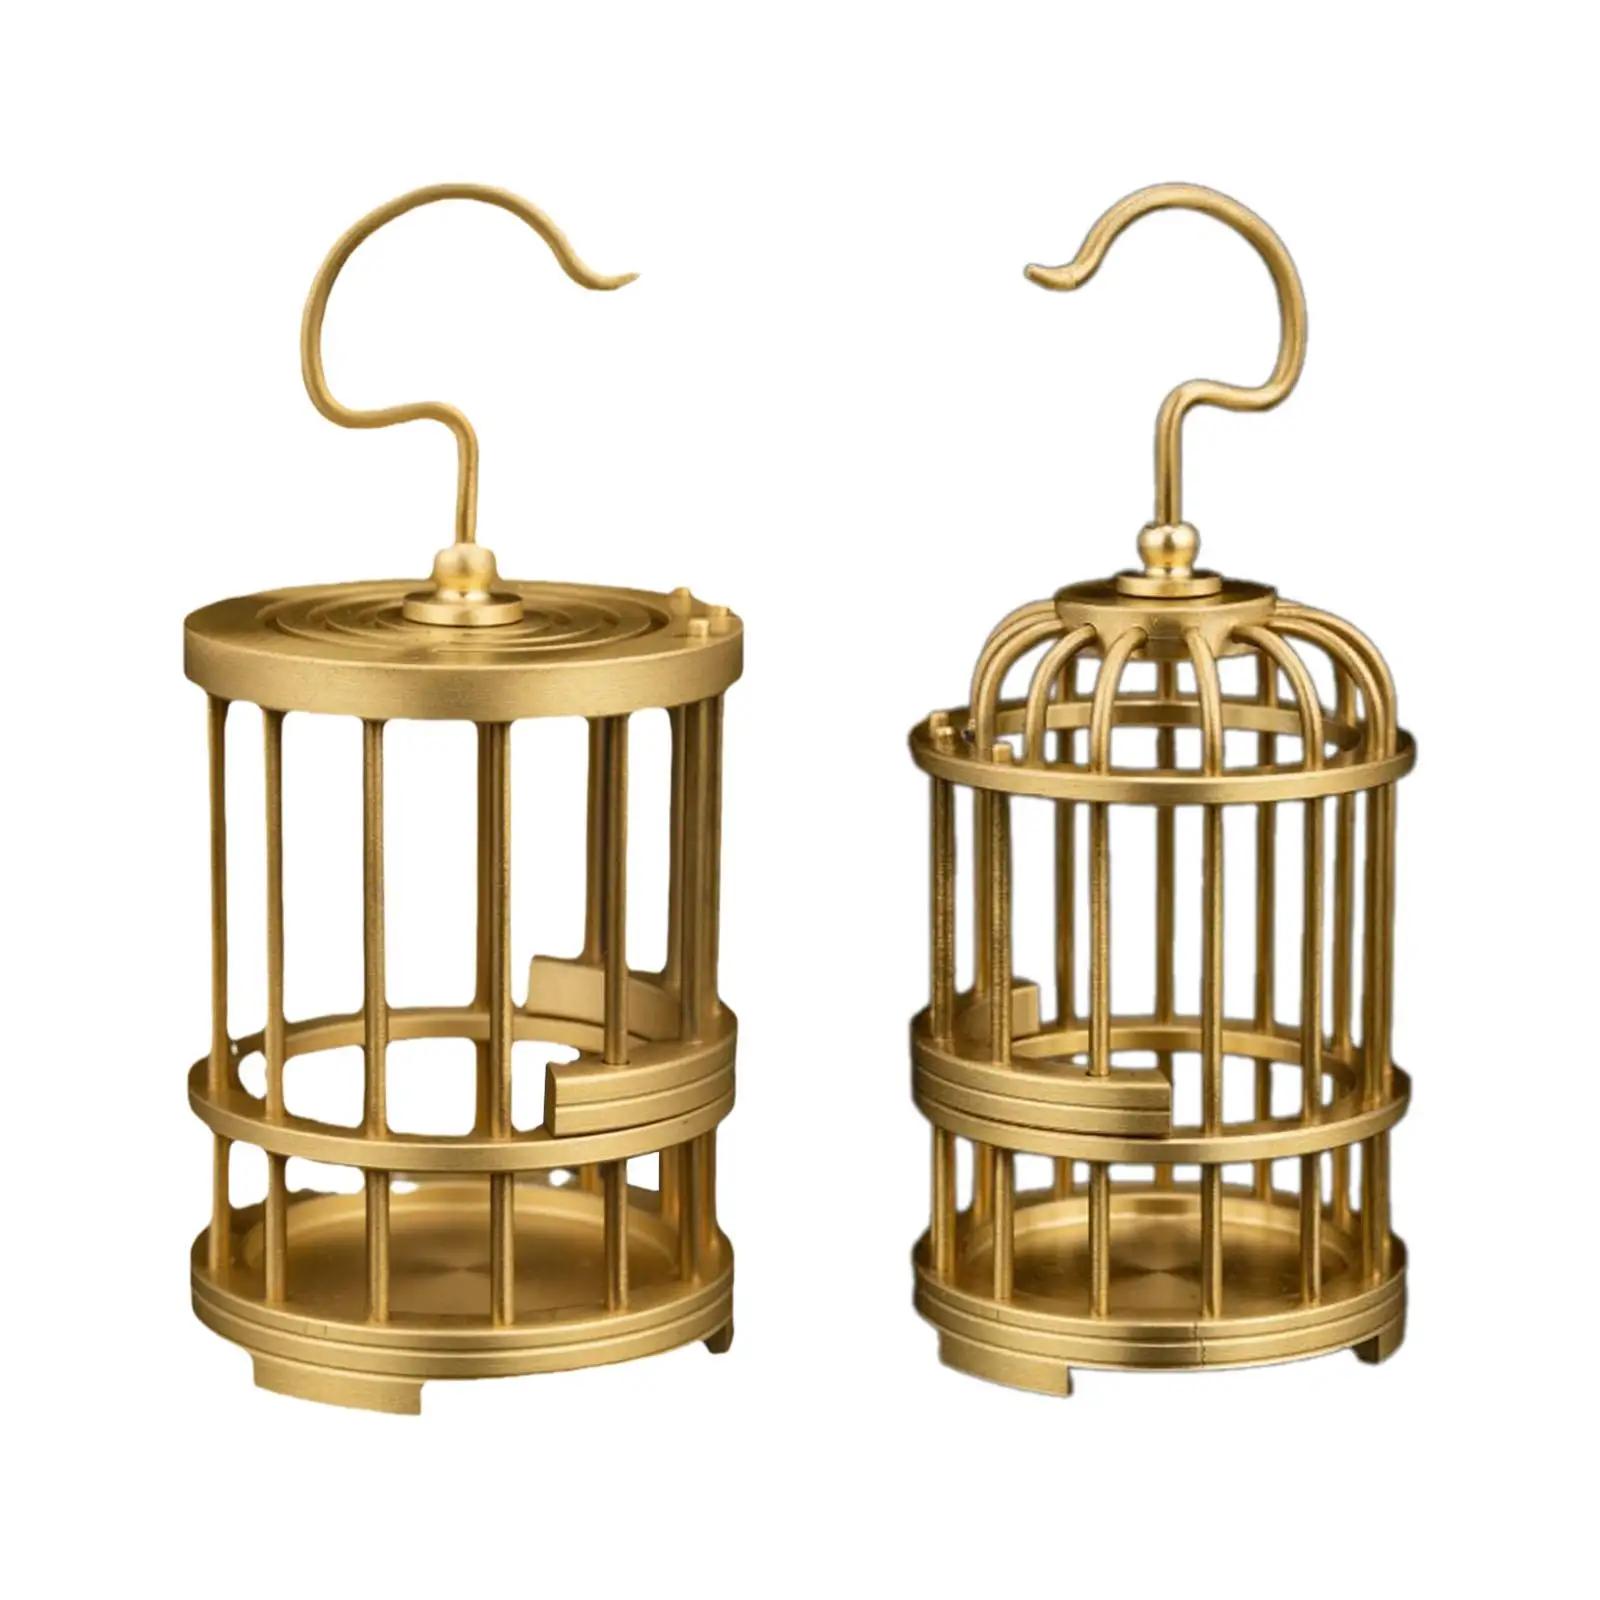 Birdcage Tealight Holder Ornament Collectibles Small Metal Tealight Holder for Birthday Table Anniversary Dining Roo